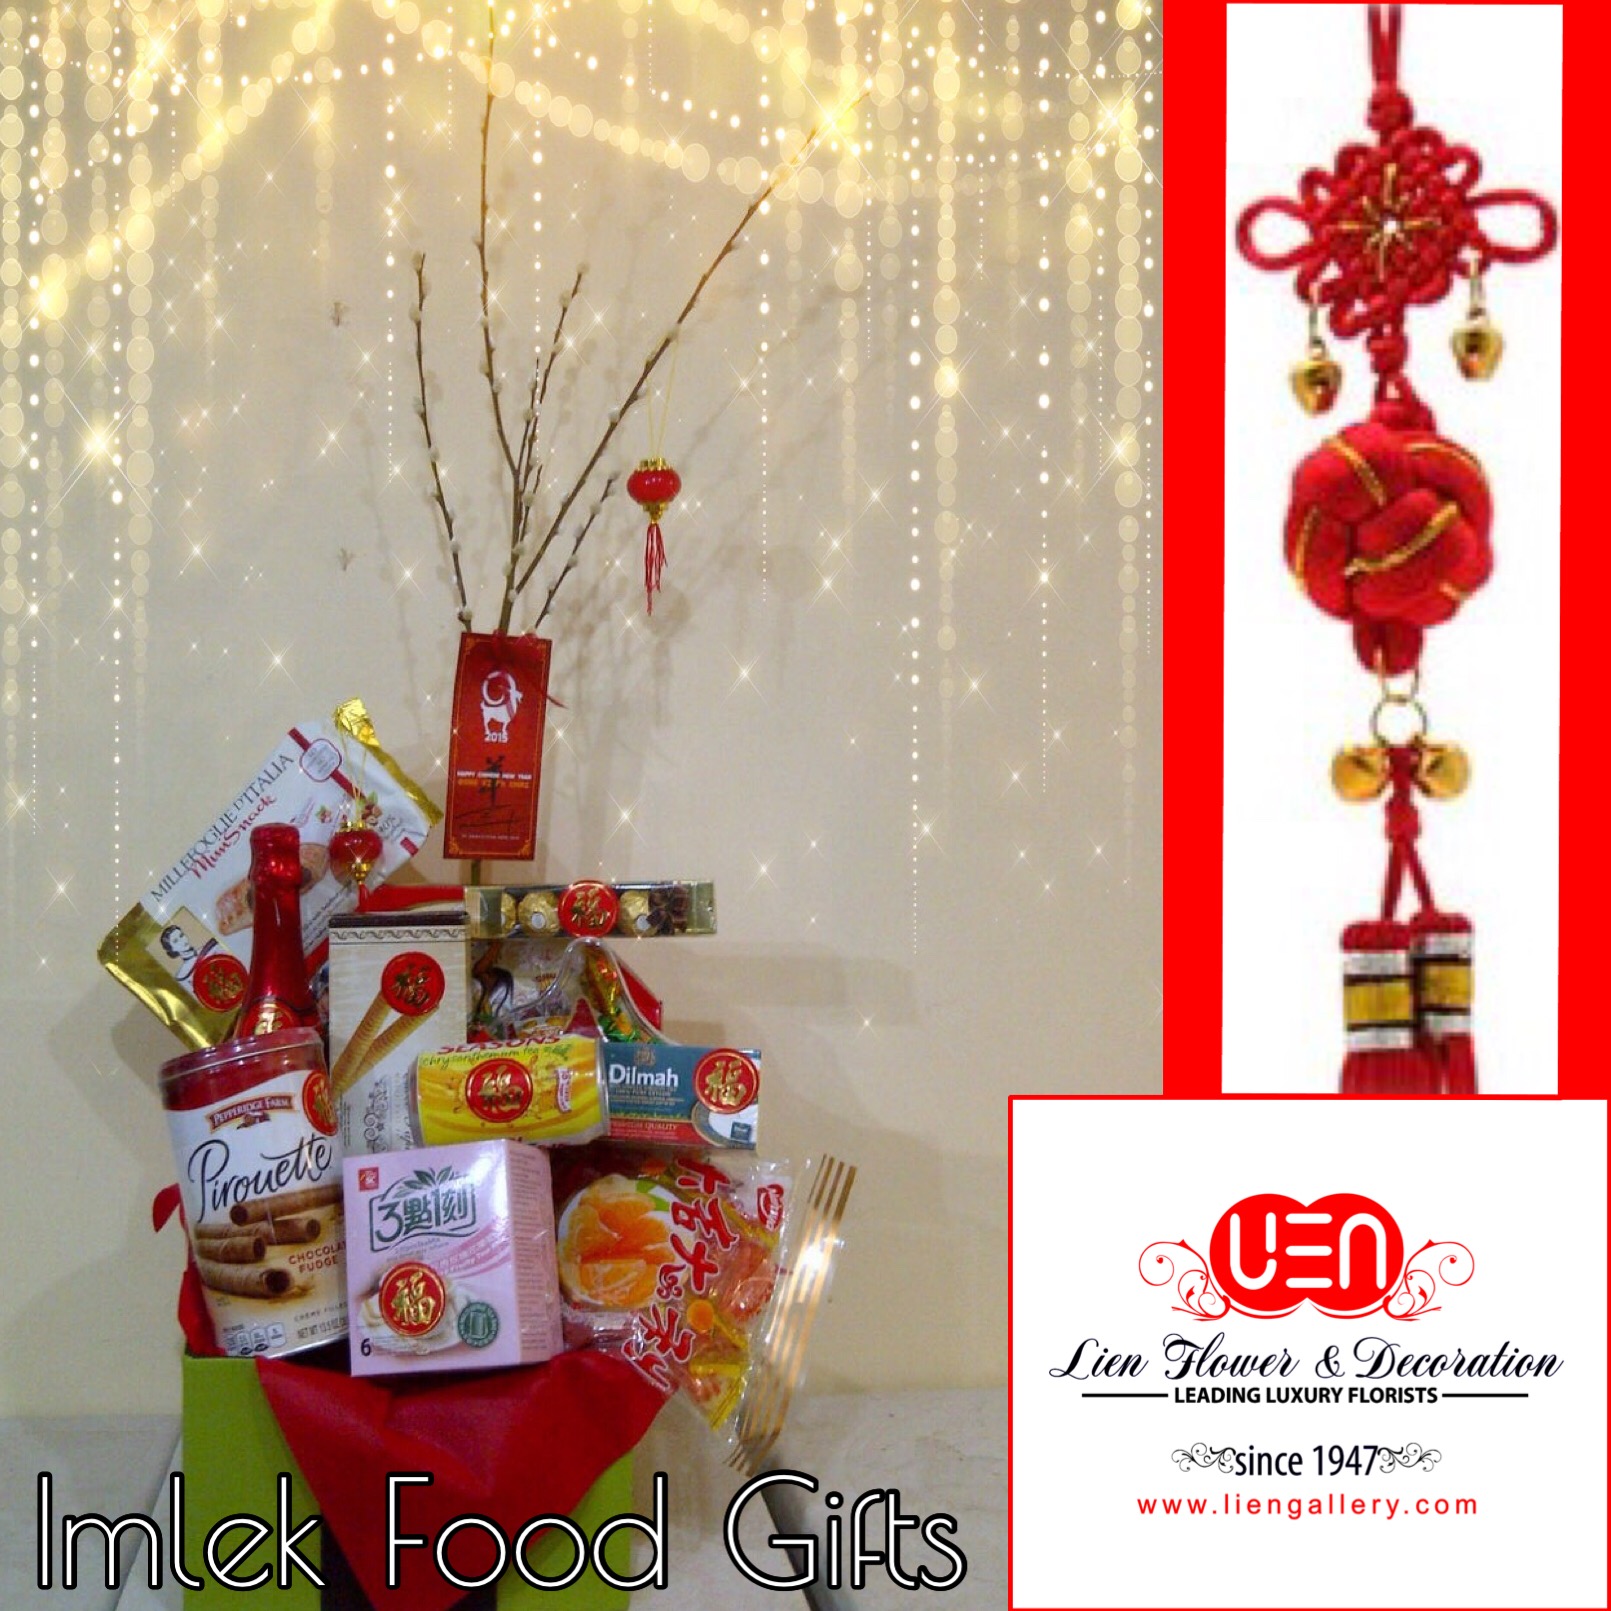 Imlek food gifts in the year of GOAT! www.liengallery.com 